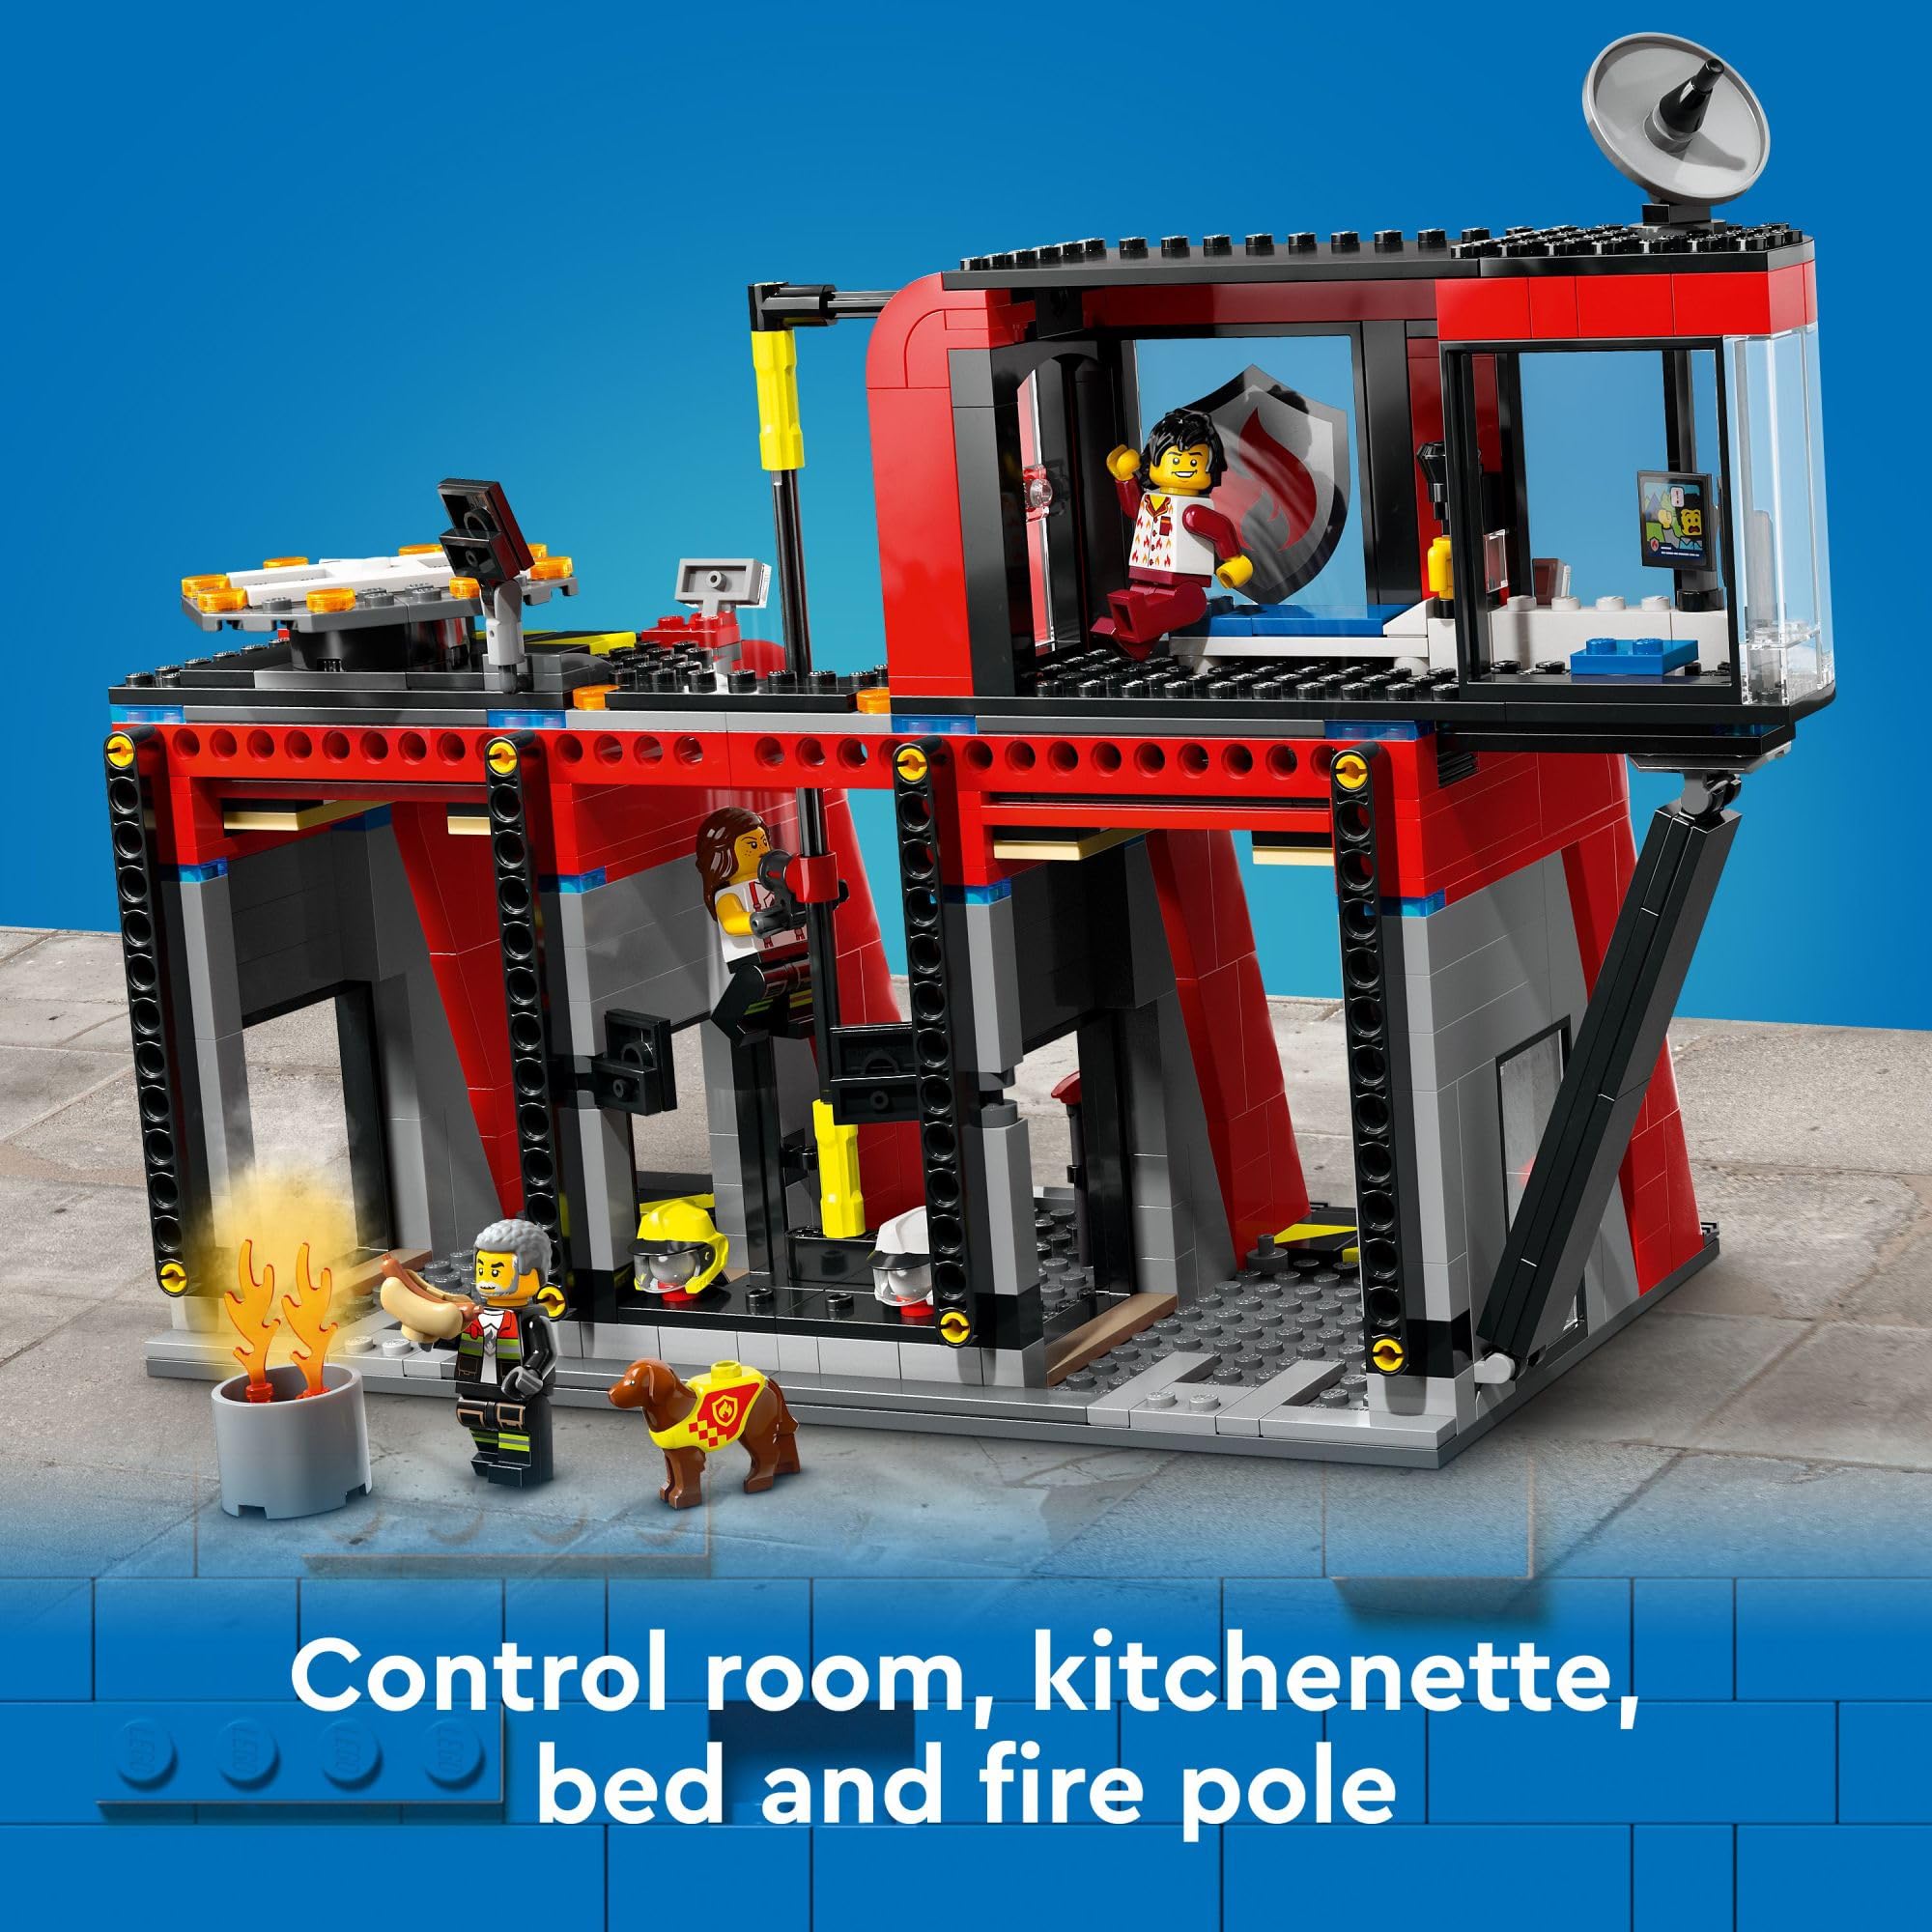 LEGO City Fire Station with Fire Truck Toy, Action Packed Fire Station Toy Playset, Birthday Gift Idea for Kids Ages 6 and Up who Love Pretend Play Toys, Includes a Dog Figure and 5 Minifigures, 60414